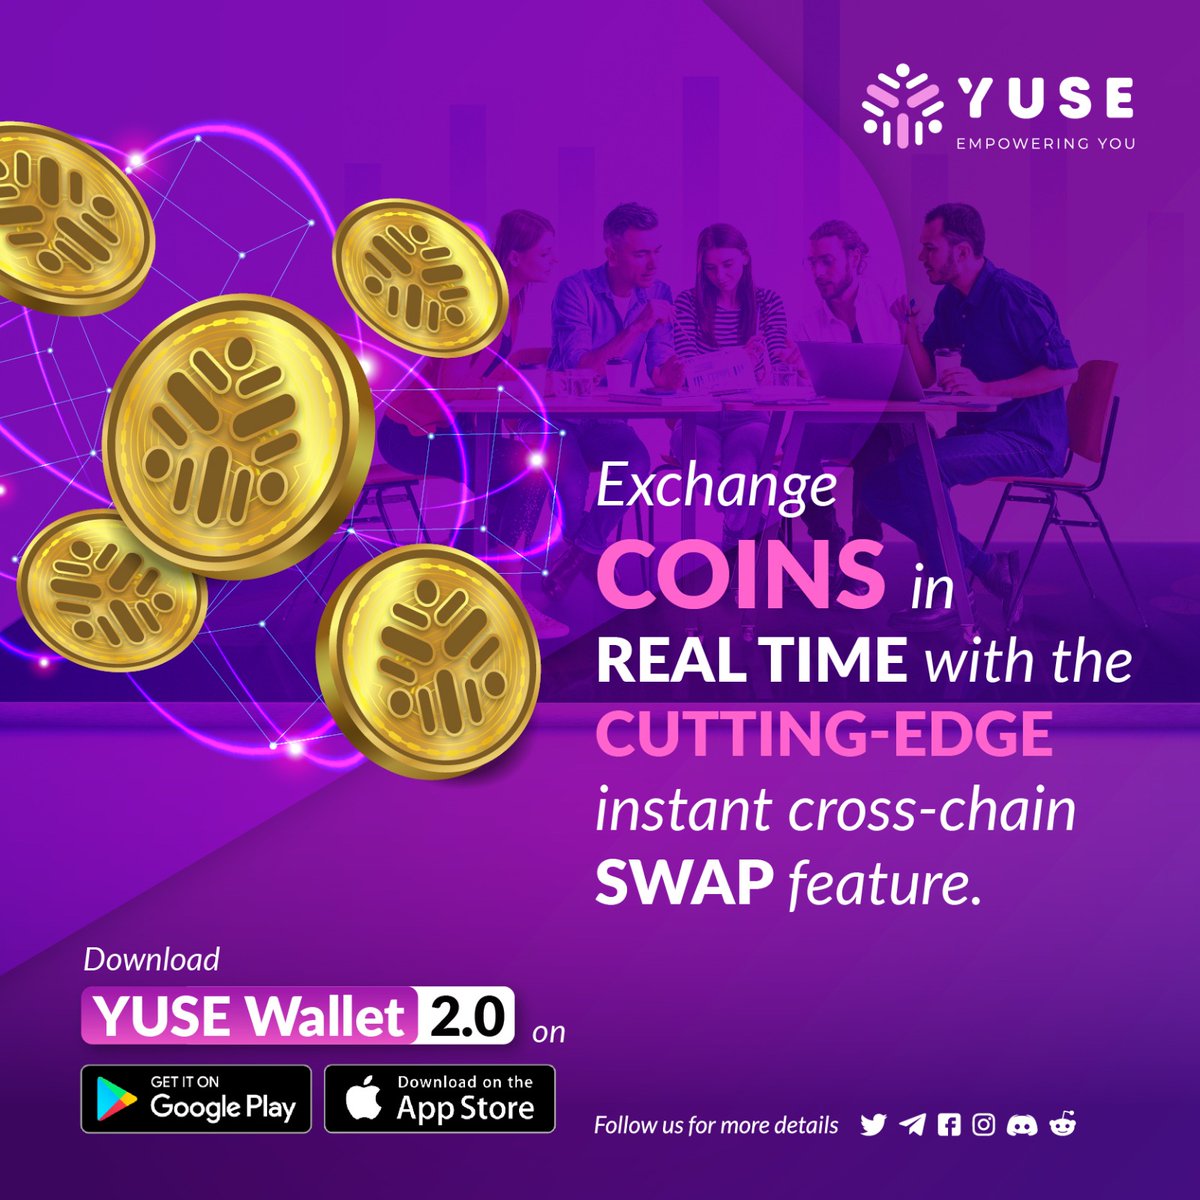 Are you tired of being limited by the boundaries of a single blockchain network?
Here's the most innovative wallet of 2023 that offer cutting-edge features like cross-chain swap features to revolutionize your experience!

#yusewallet #crosschainswap #digitalassetexperience…